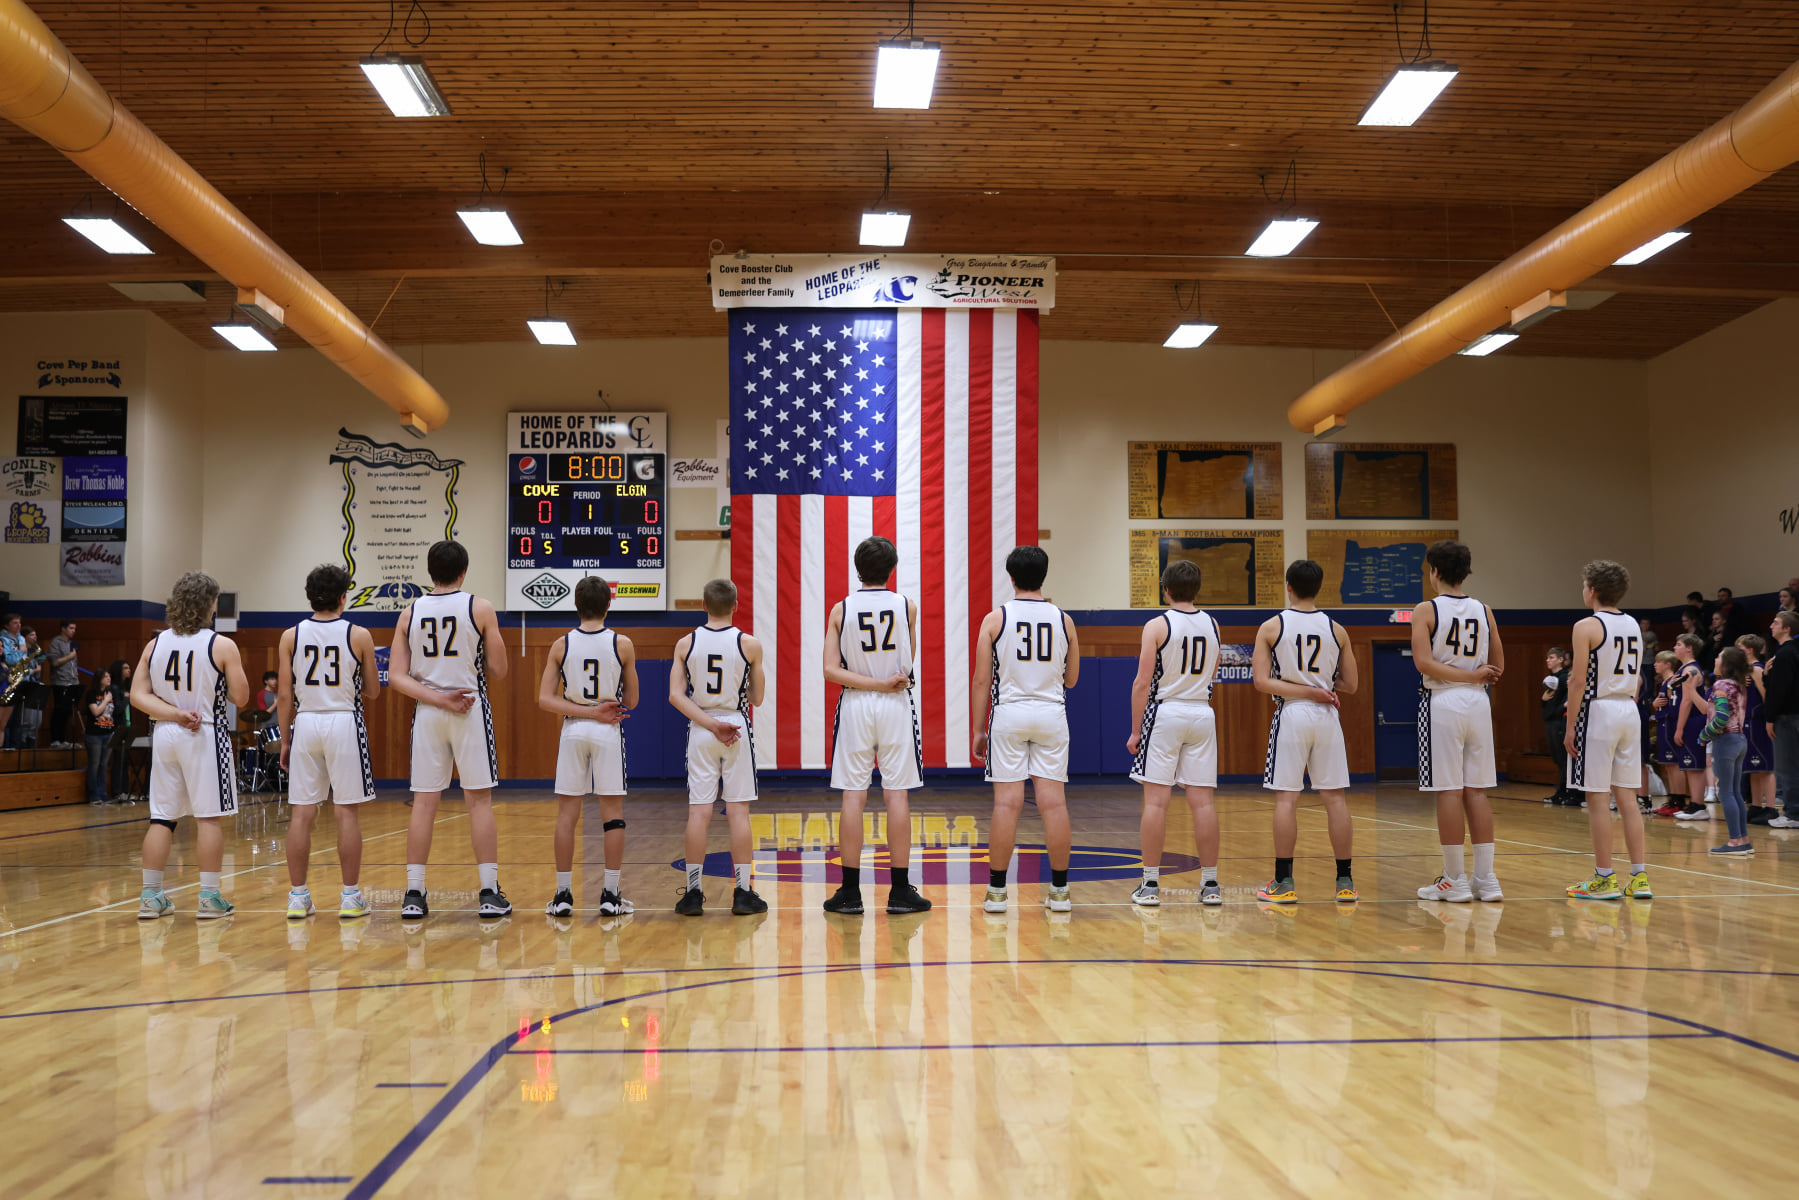 Cove basketball team and the American flag 